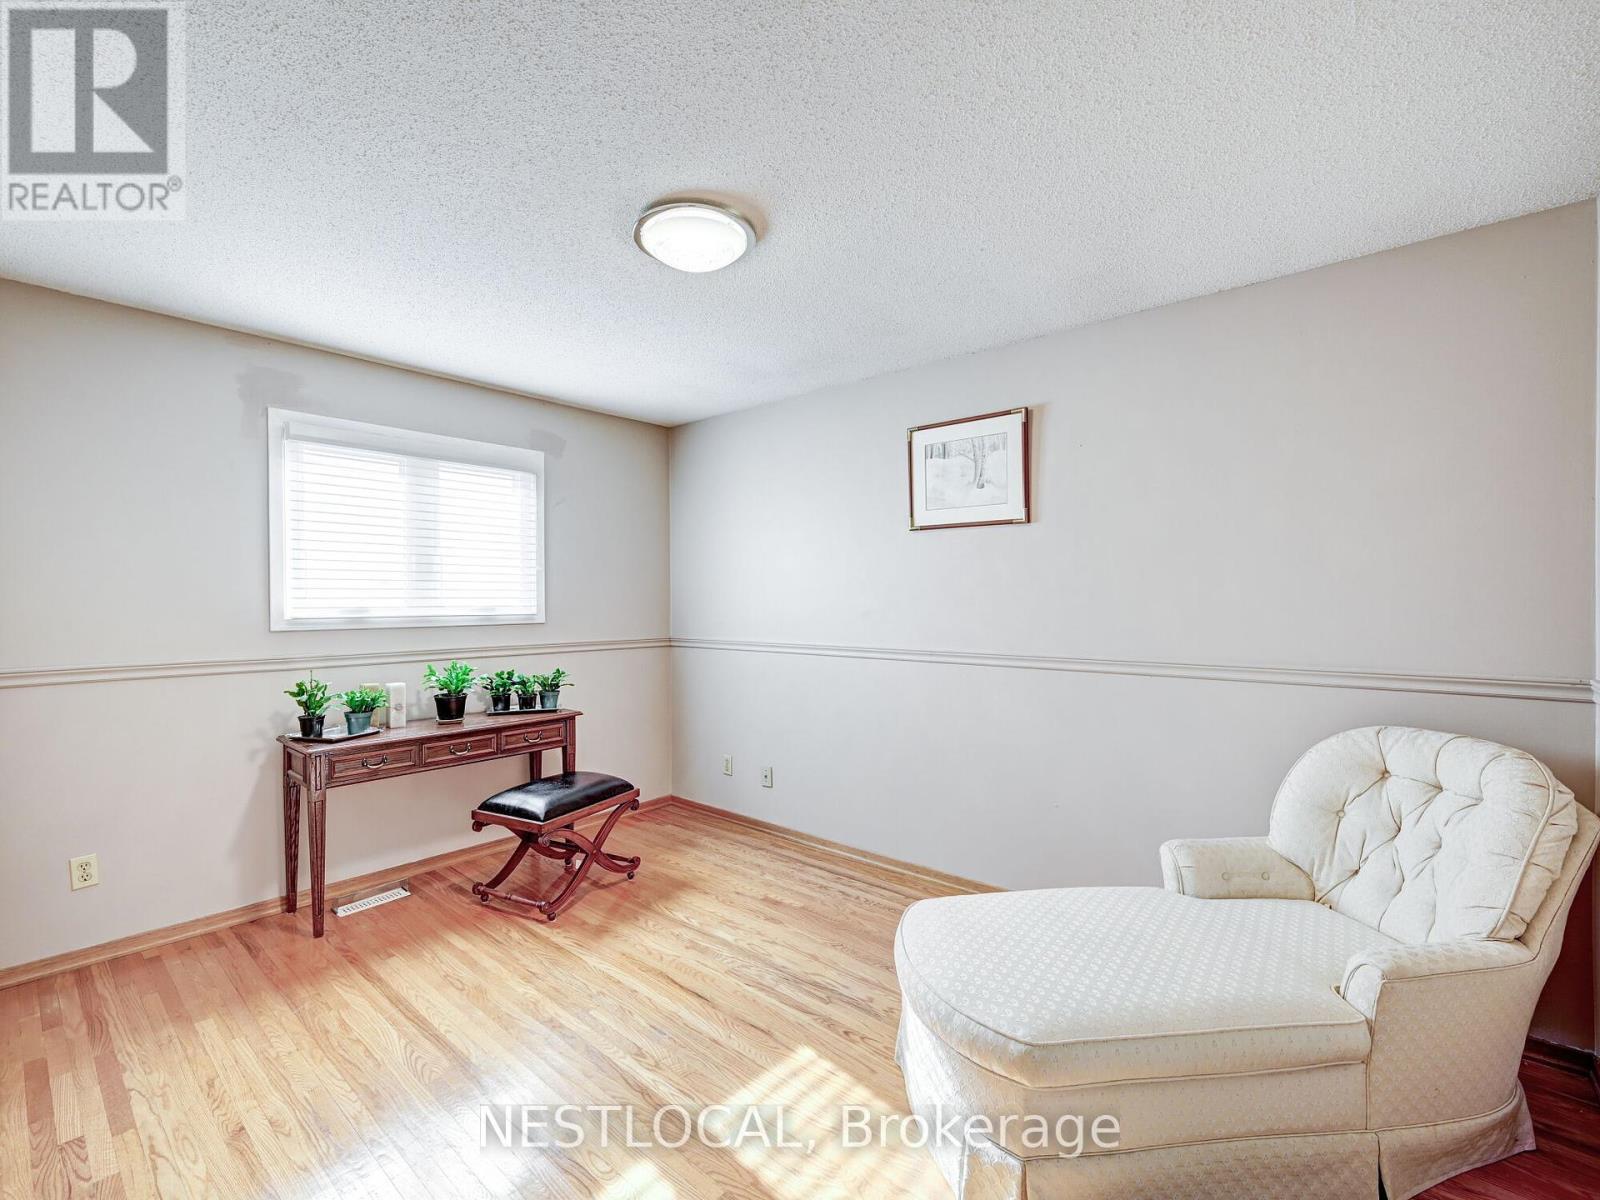 For Sale in Mississauga - 2577 Palisander Avenue, Mississauga, Ontario  L5B 2L1 - Photo 21 - W8137262